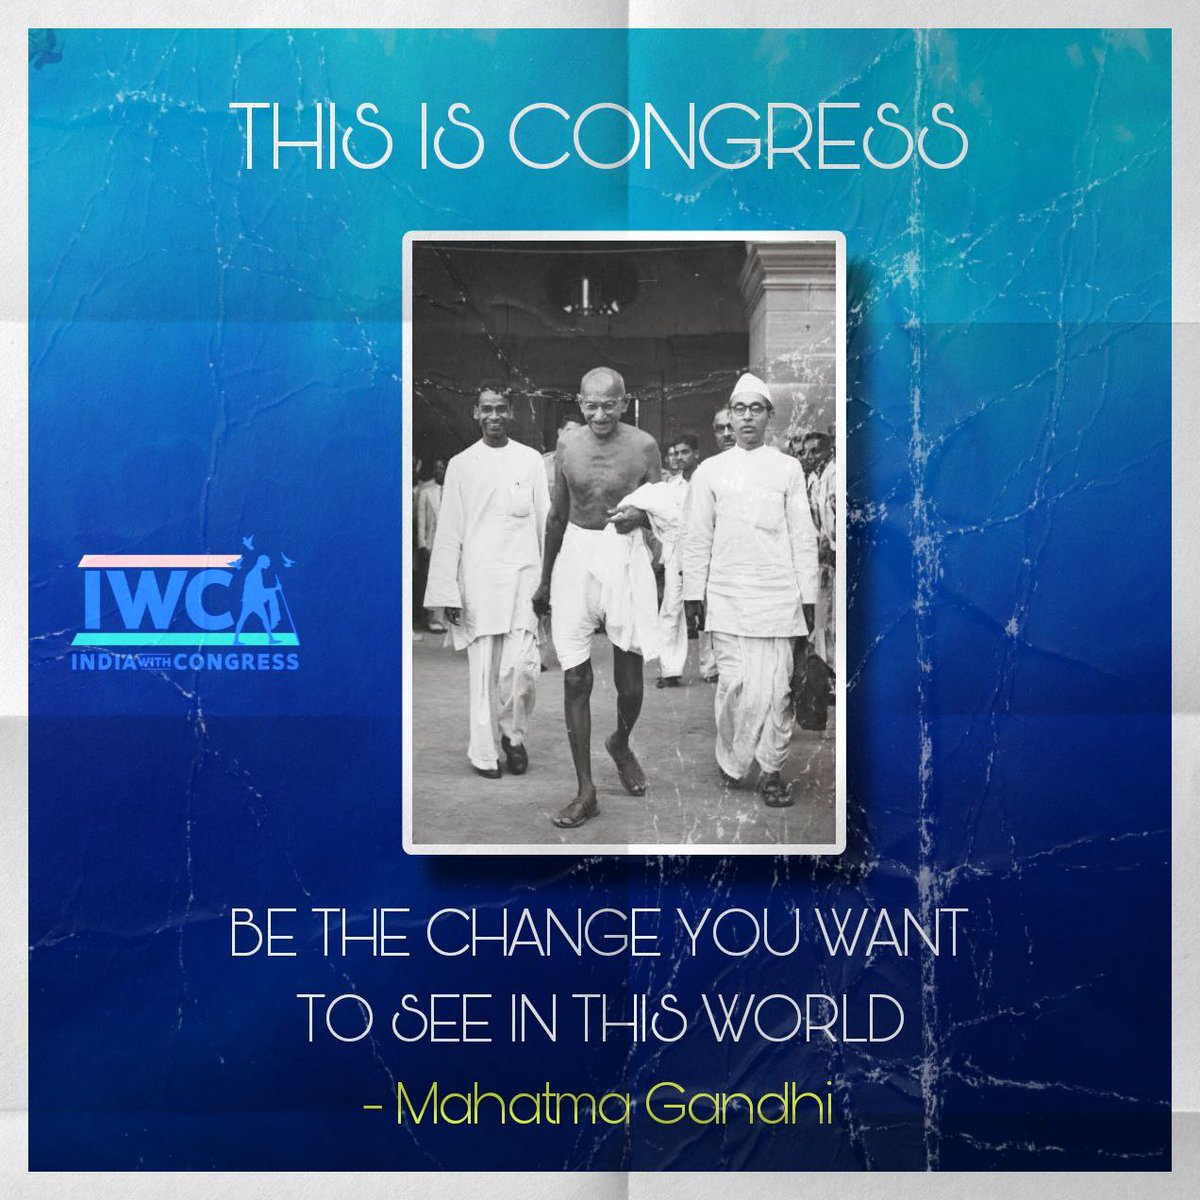 Congress Party dreamt of an independent, democratic & secular India. It launched a movement with the masses of India & materialized this dream. There's a need again to fight out the current fascist and divisive regime. INDIA can do it!

#ThisIsCongress
#IWCWithNyay